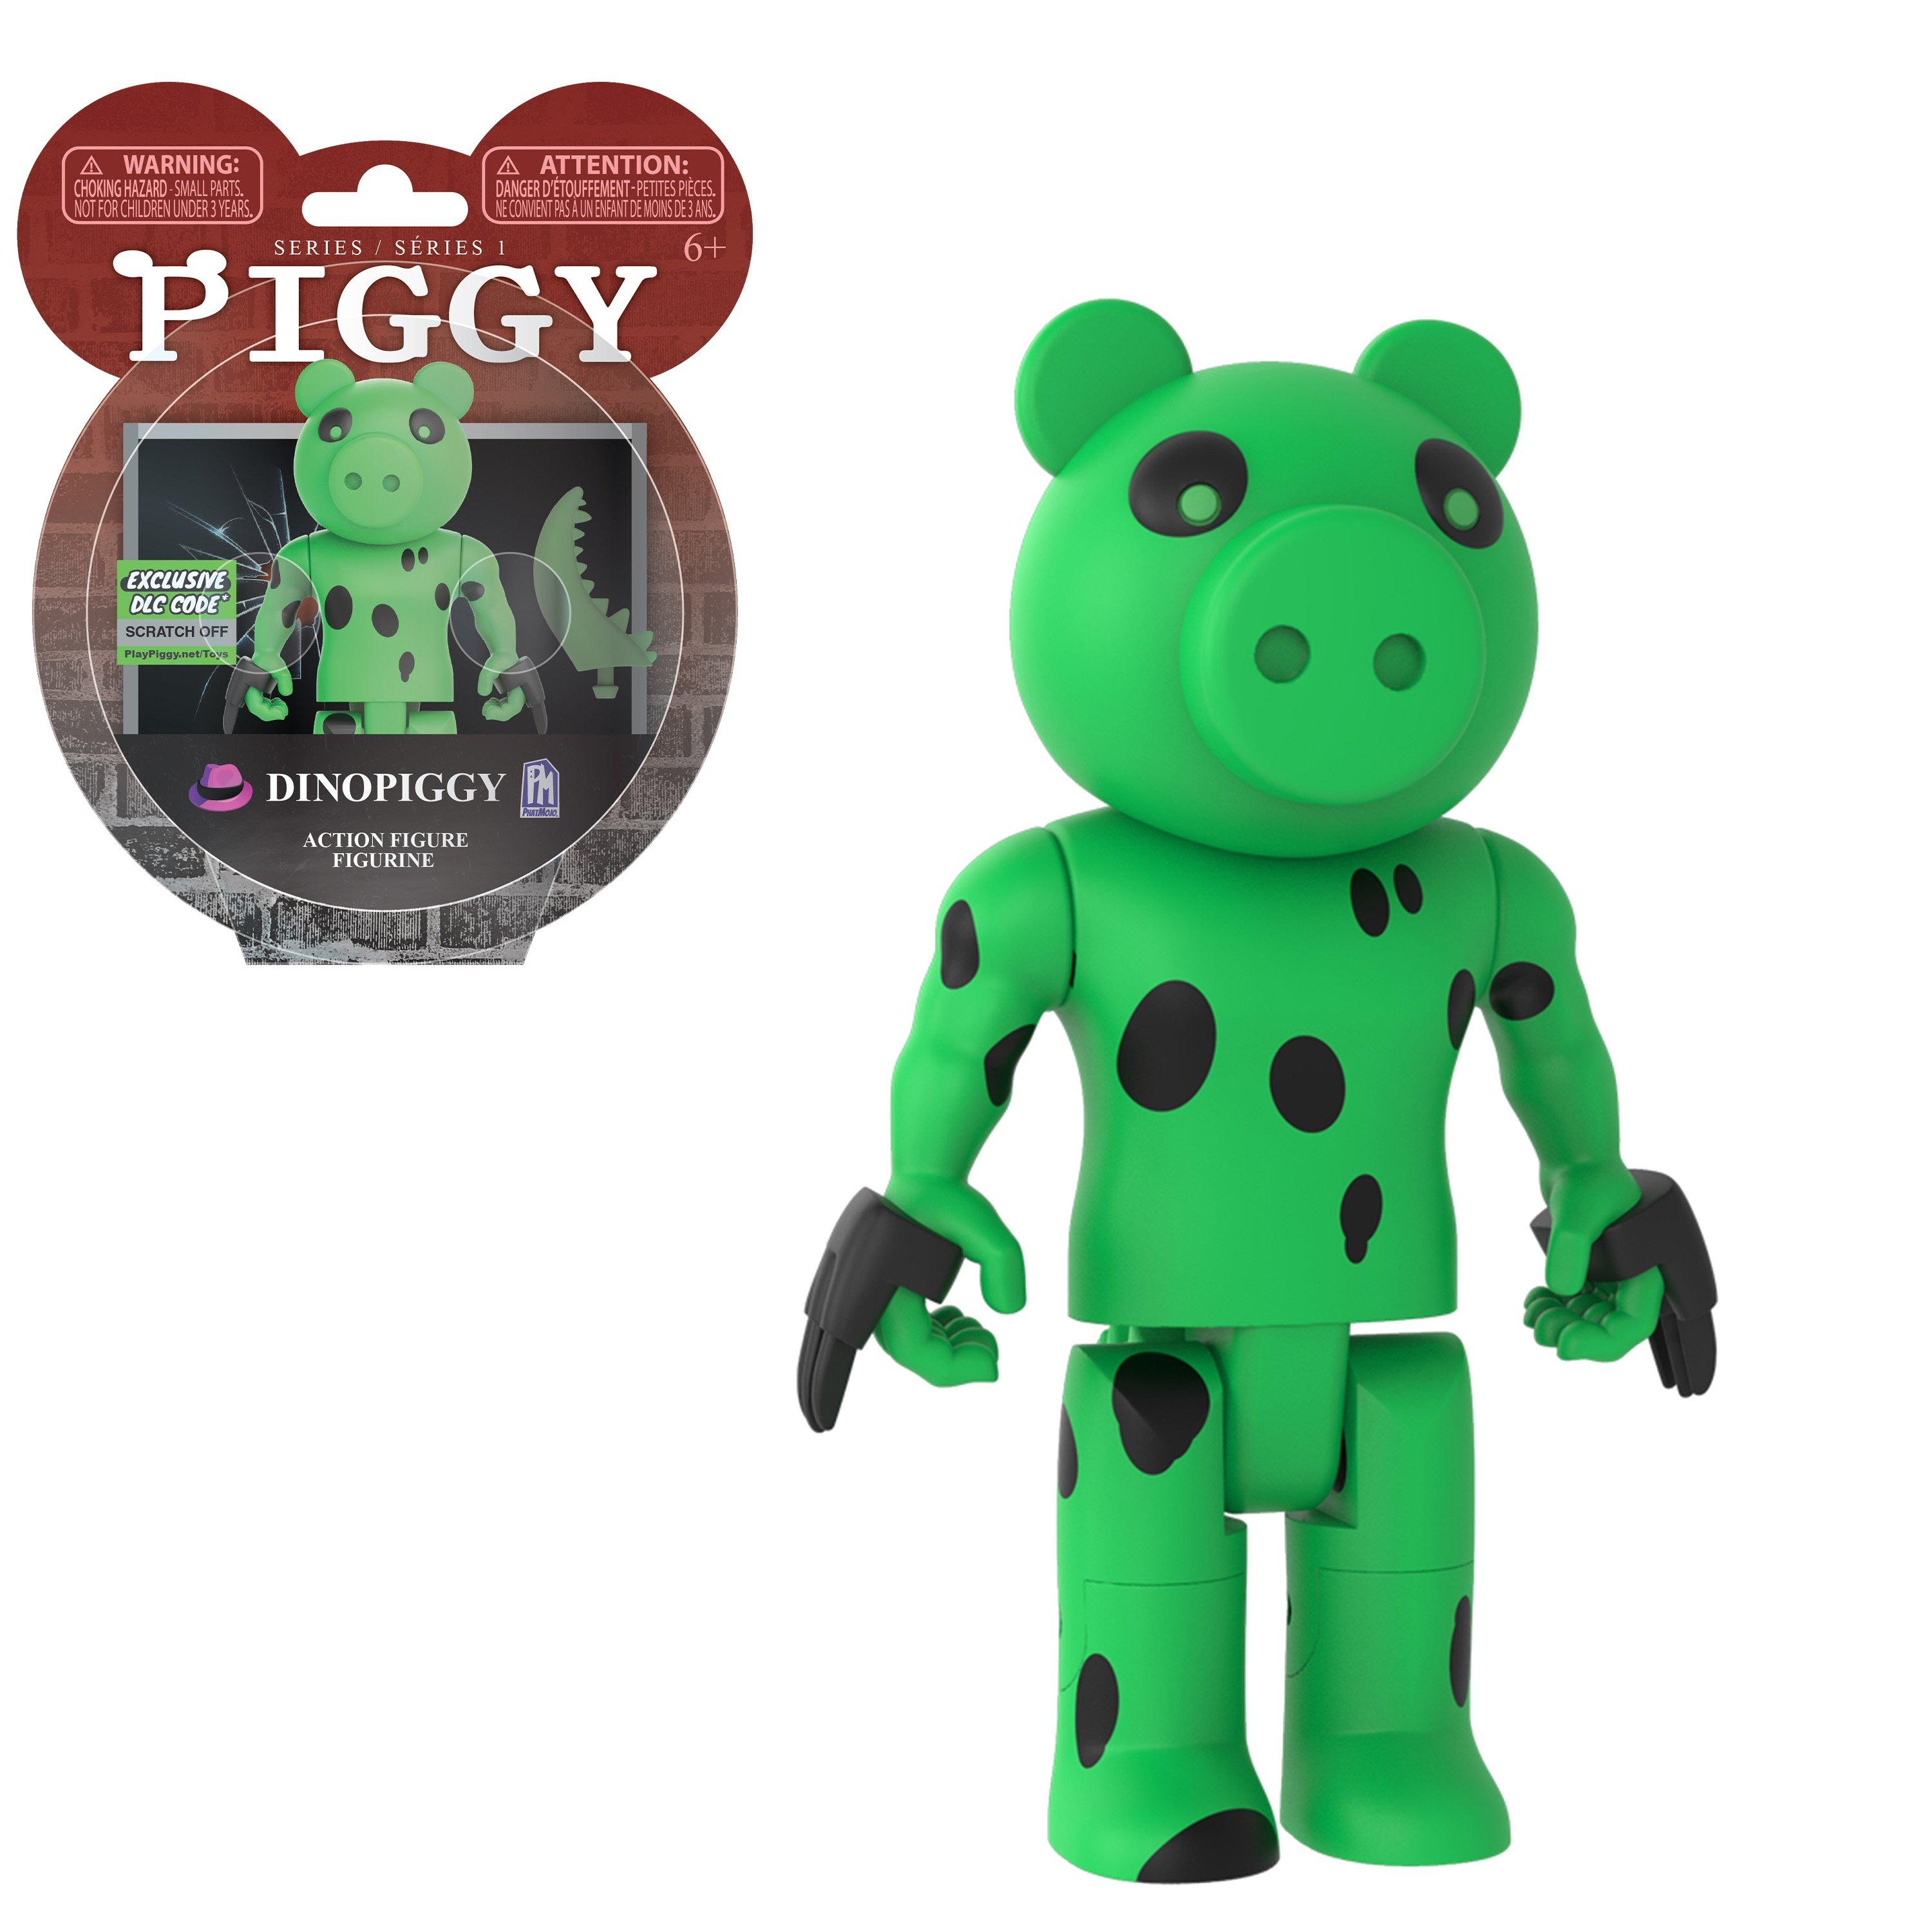 Piggy Dinopiggy Series 1 Action Figure Gamestop - how to get lego arms in roblox on xbox one